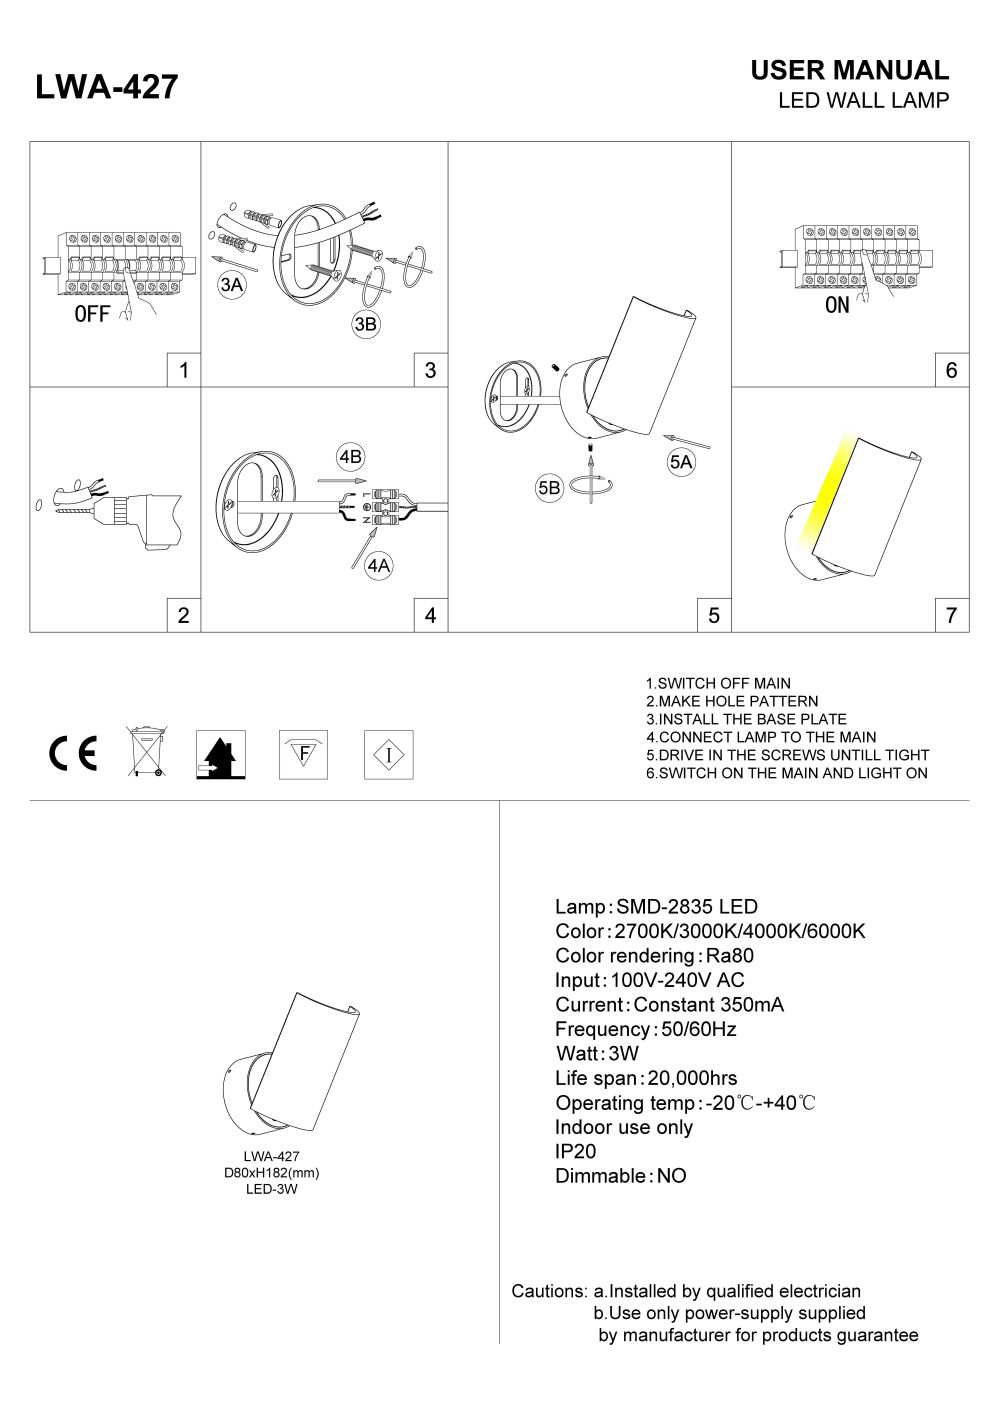 LWA-427 wall washer interior LED wall light installation guide - uplighter